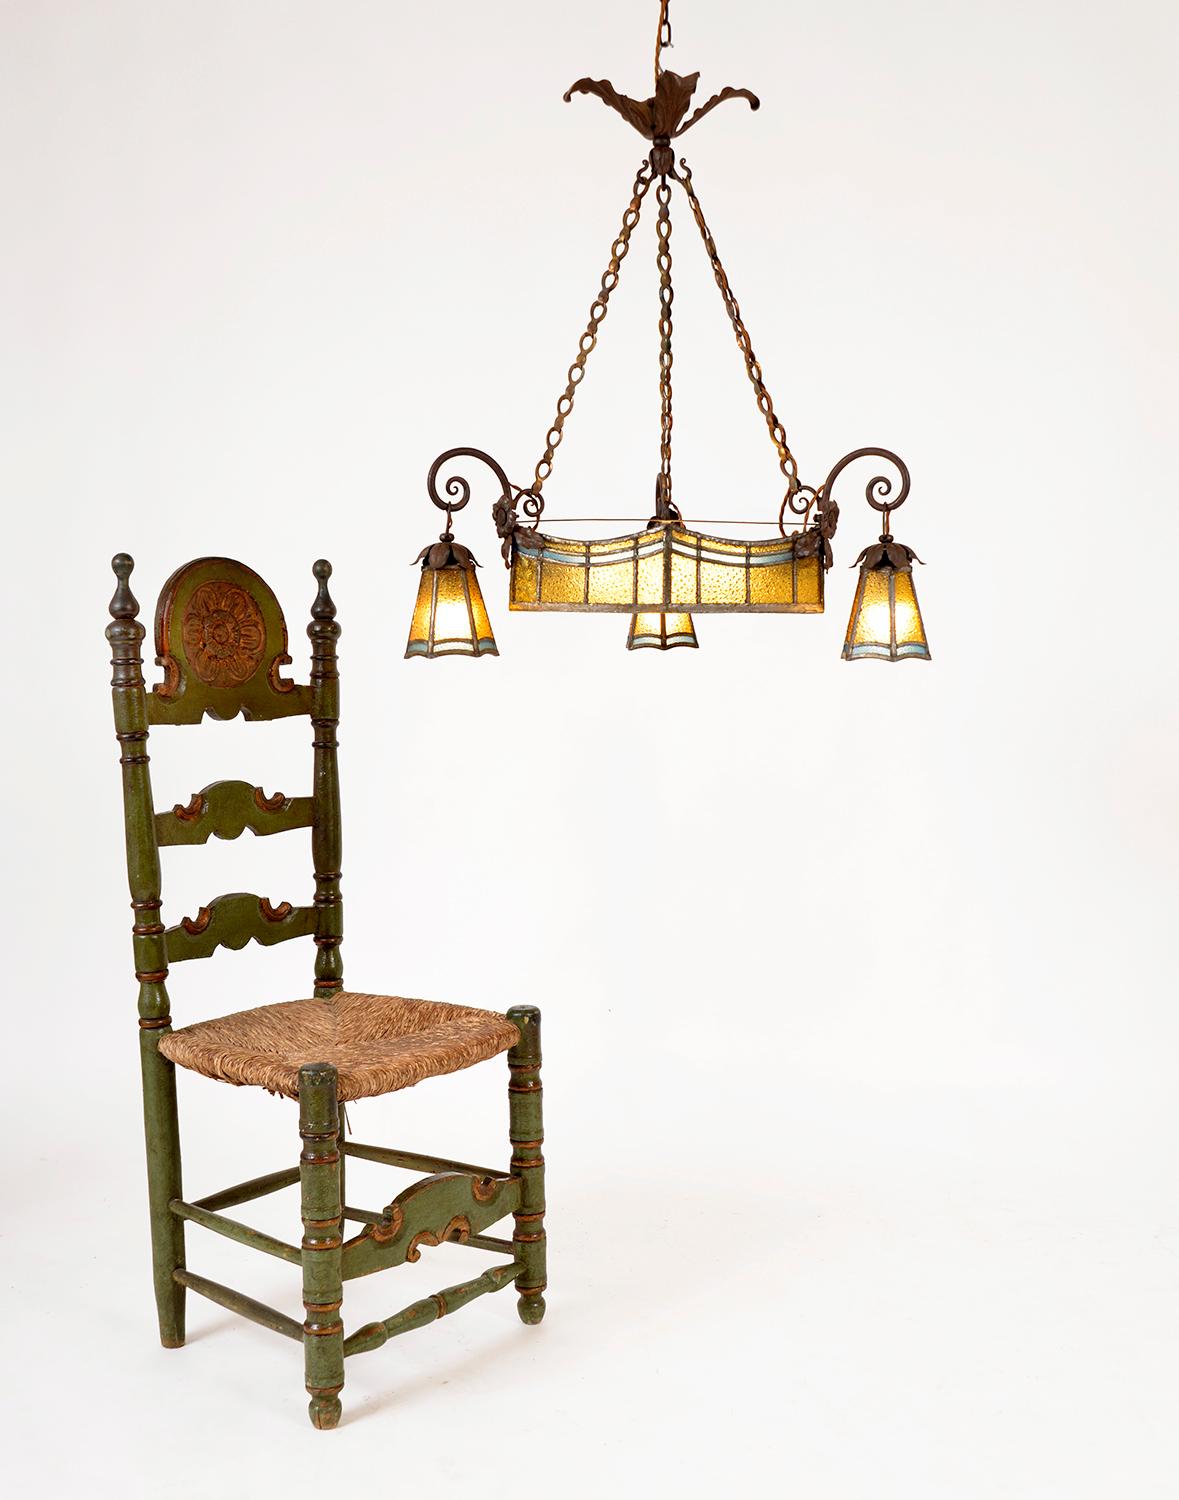 20th Century Antique French Arts & Crafts Leaded Stained Glass Hall Pendant Light Chandelier